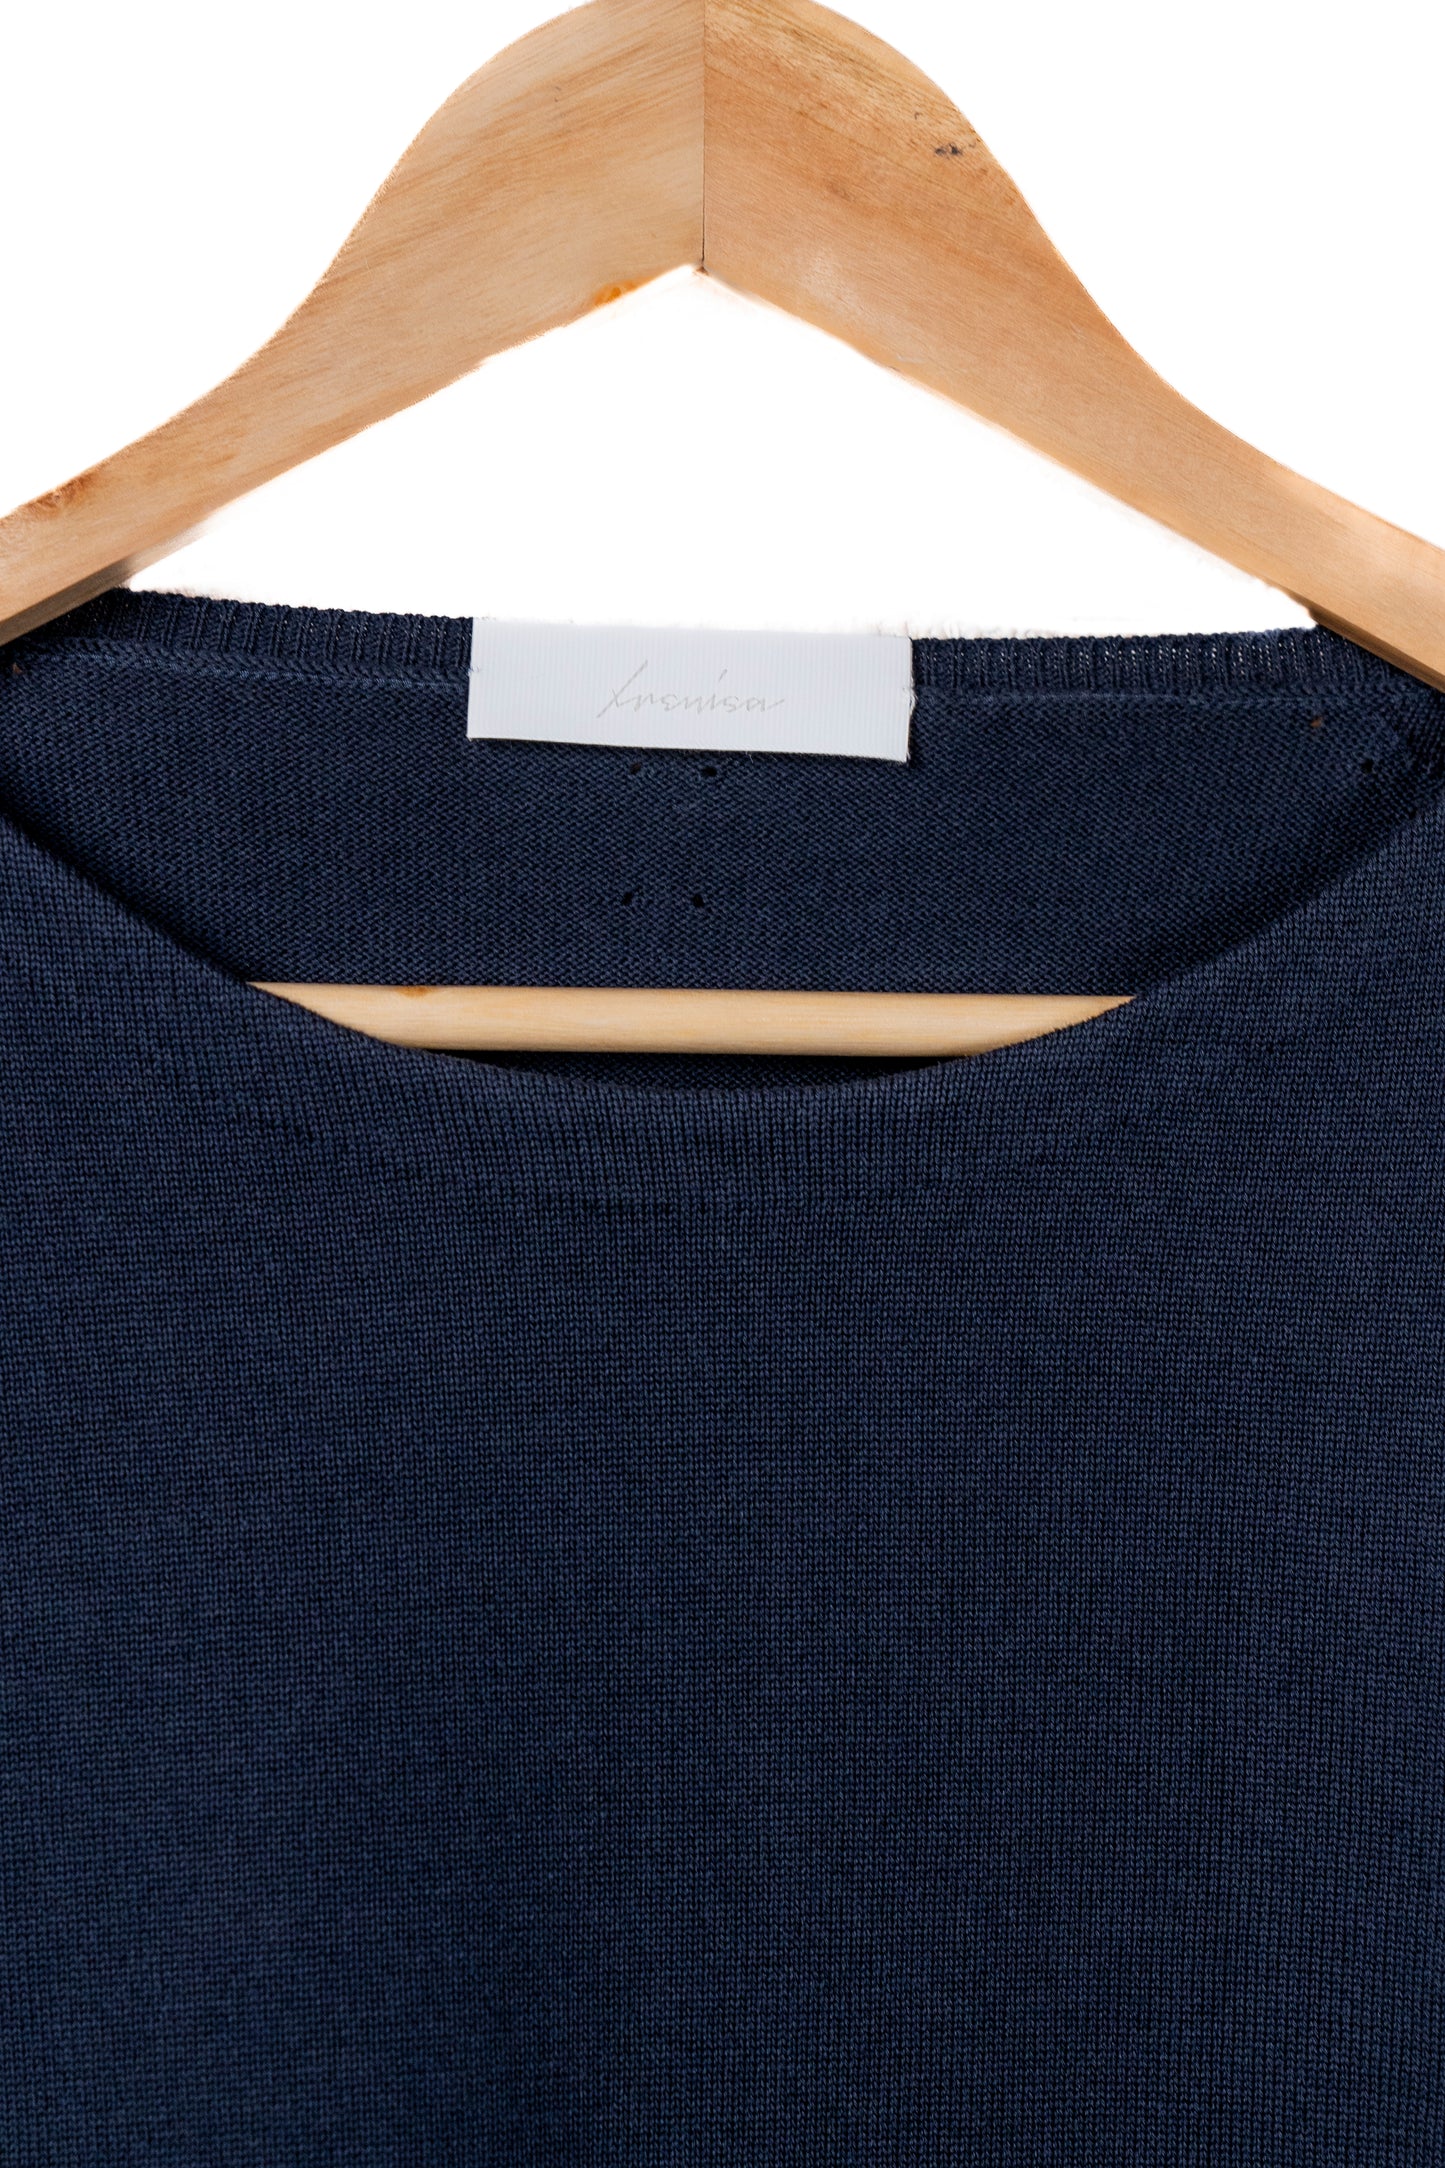 BOAT NECK PULL OVER KNIT